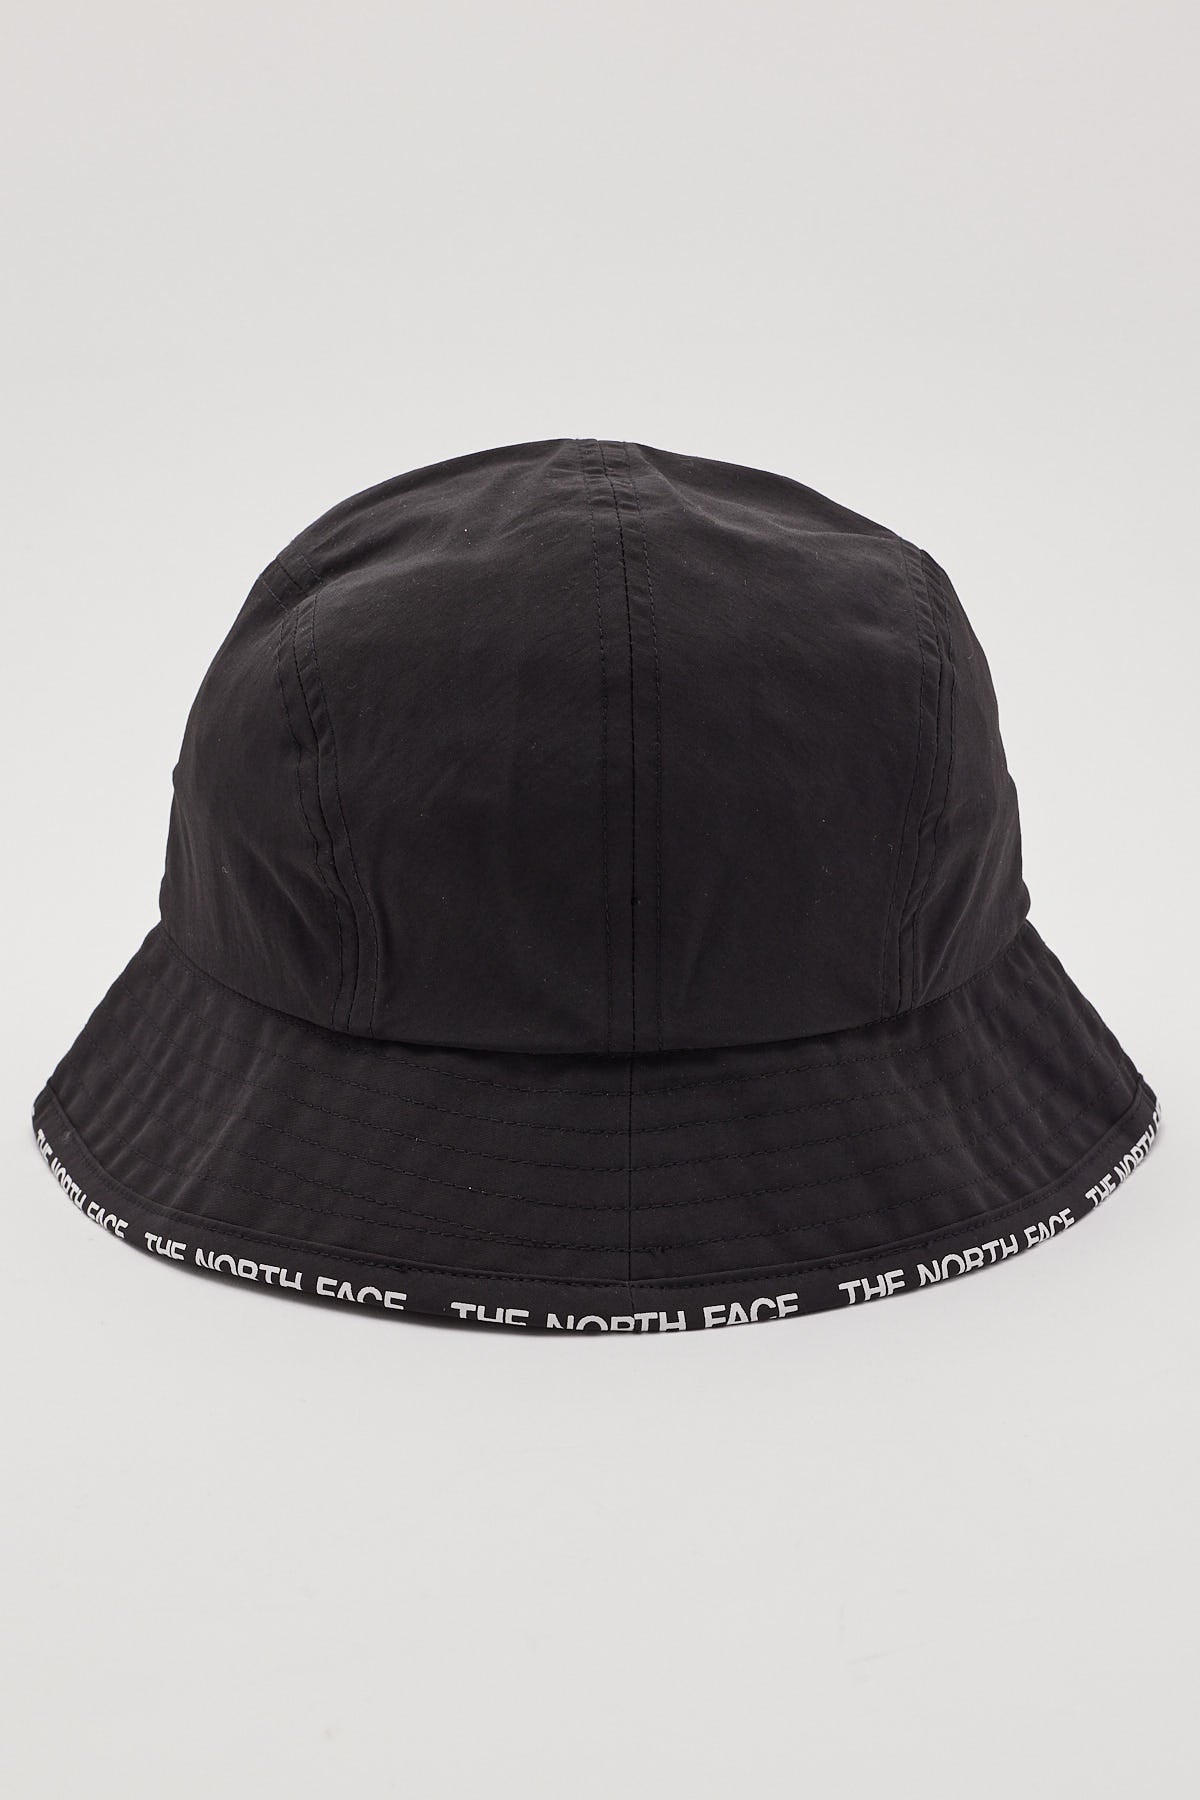 The North Face Cypress Bucket Black